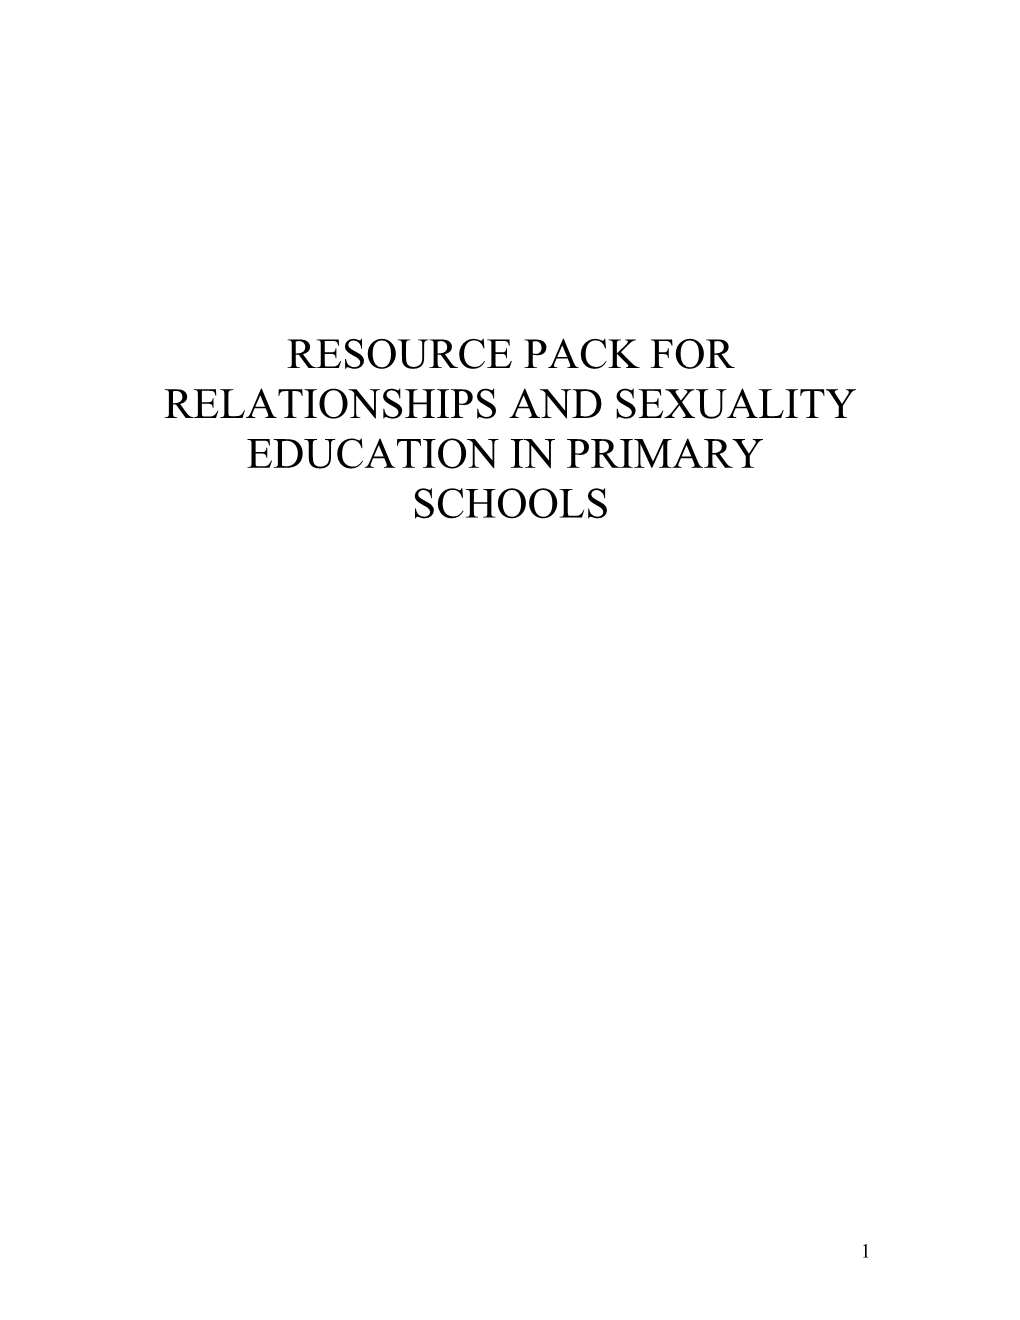 Resource Pack for Relationships and Sexuality Education for Primary Trainers